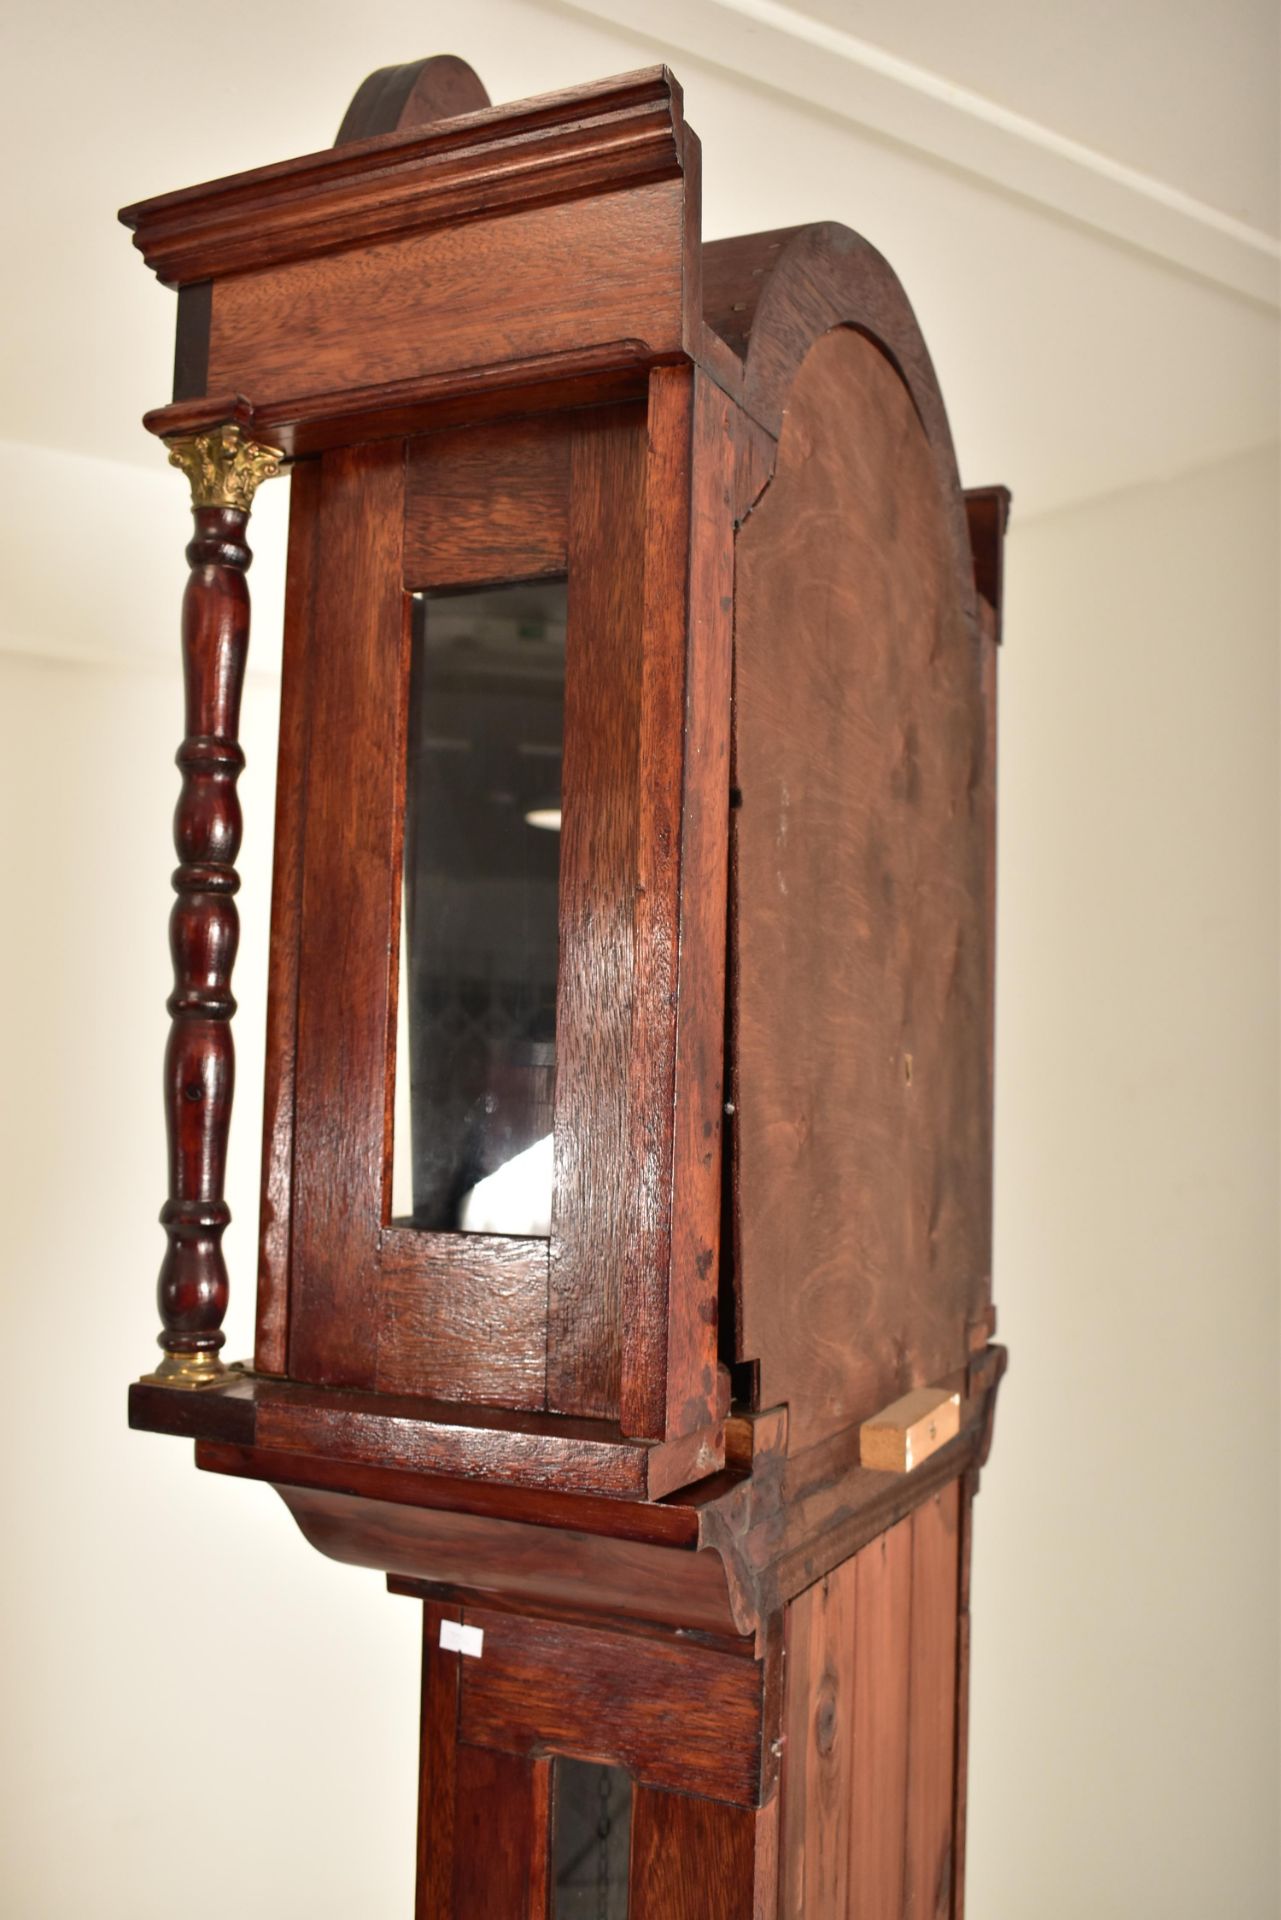 JAMES WEBB & SON OF FROME WEST COUNTRY LONGCASE CLOCK - Image 7 of 11